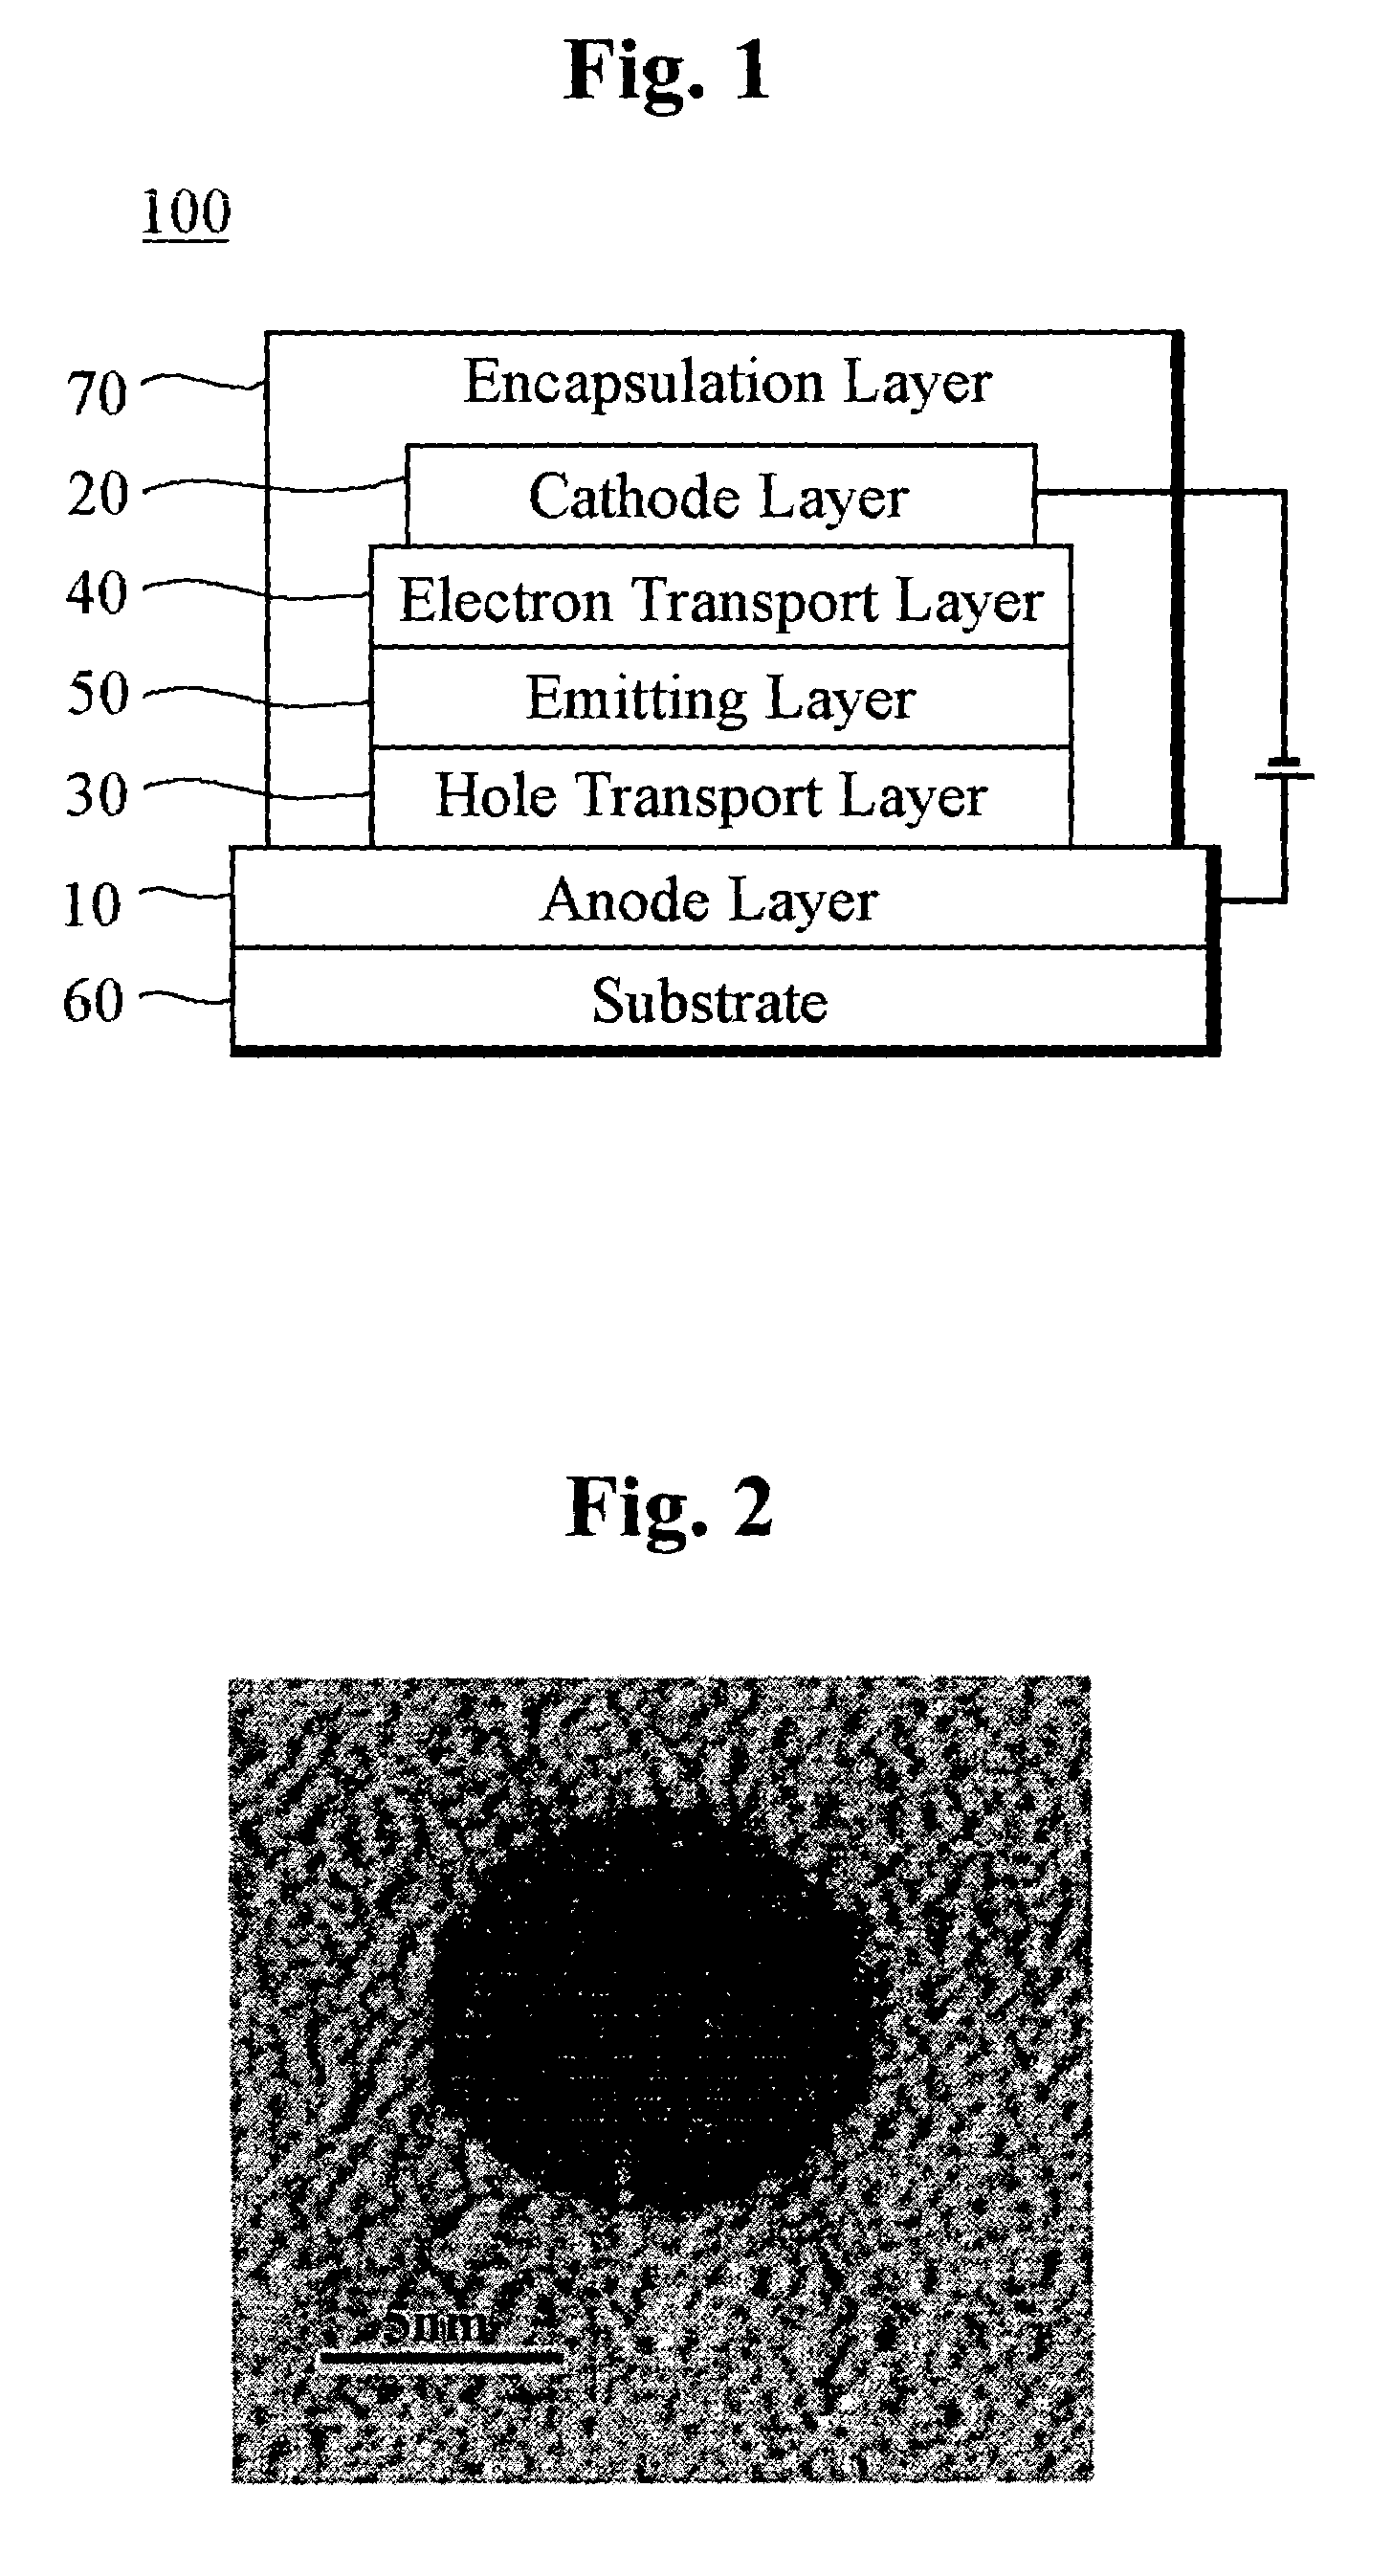 Polymeric electroluminescent device using an emitting layer of nanocomposites